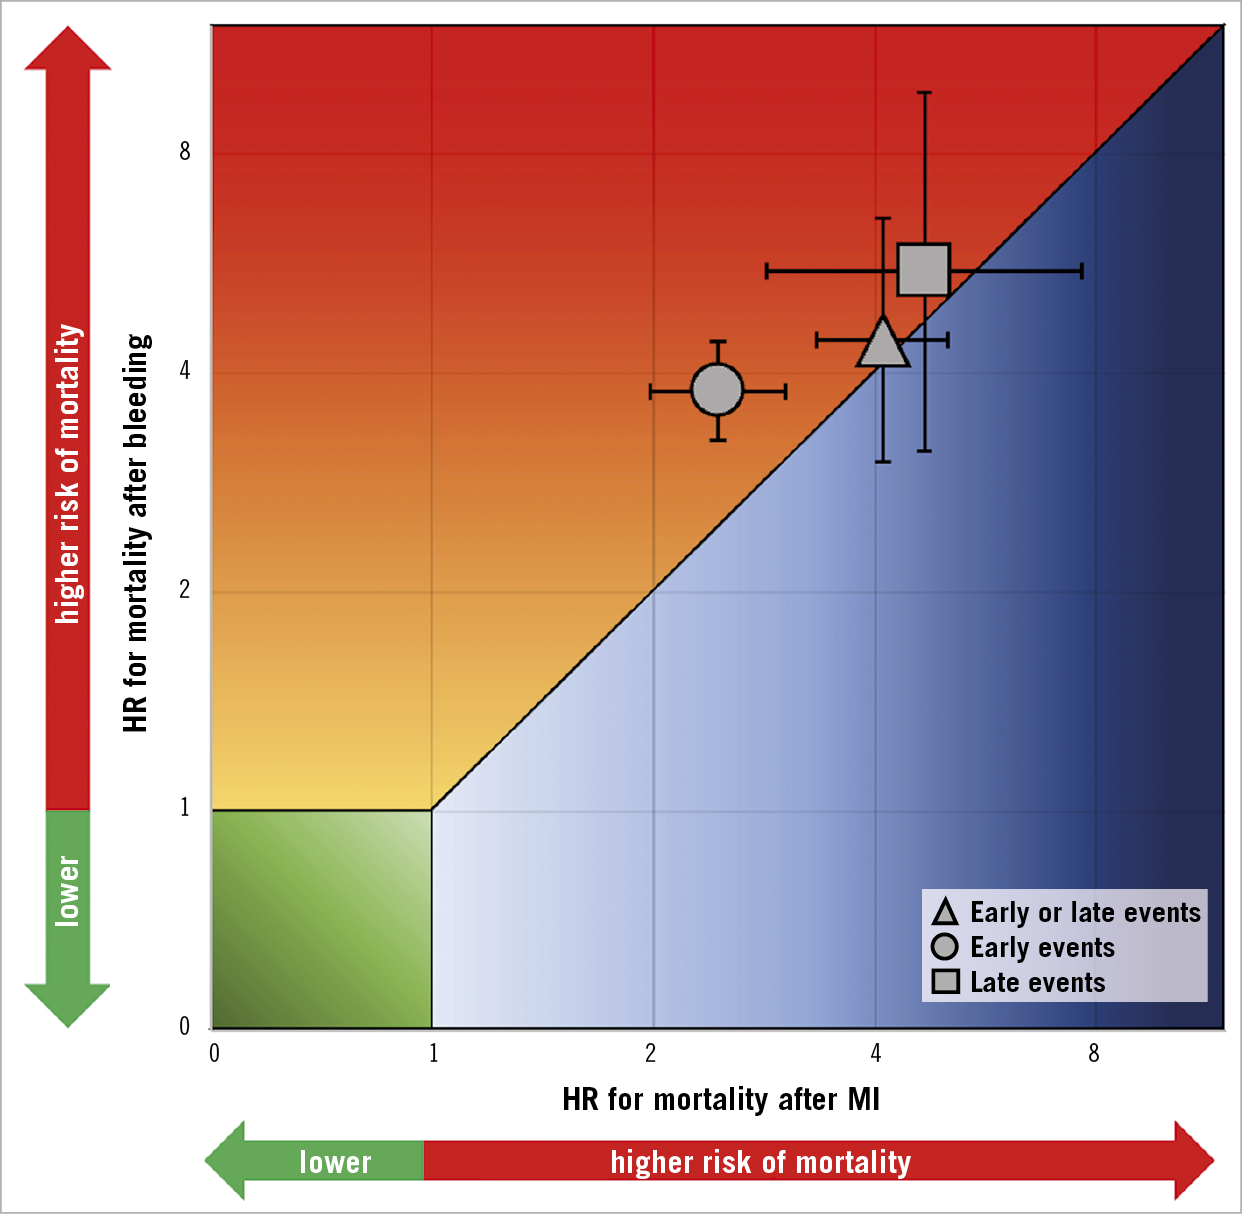 Central illustration. Association between bleeding and myocardial infarction with mortality for early events, late events and early or late events.